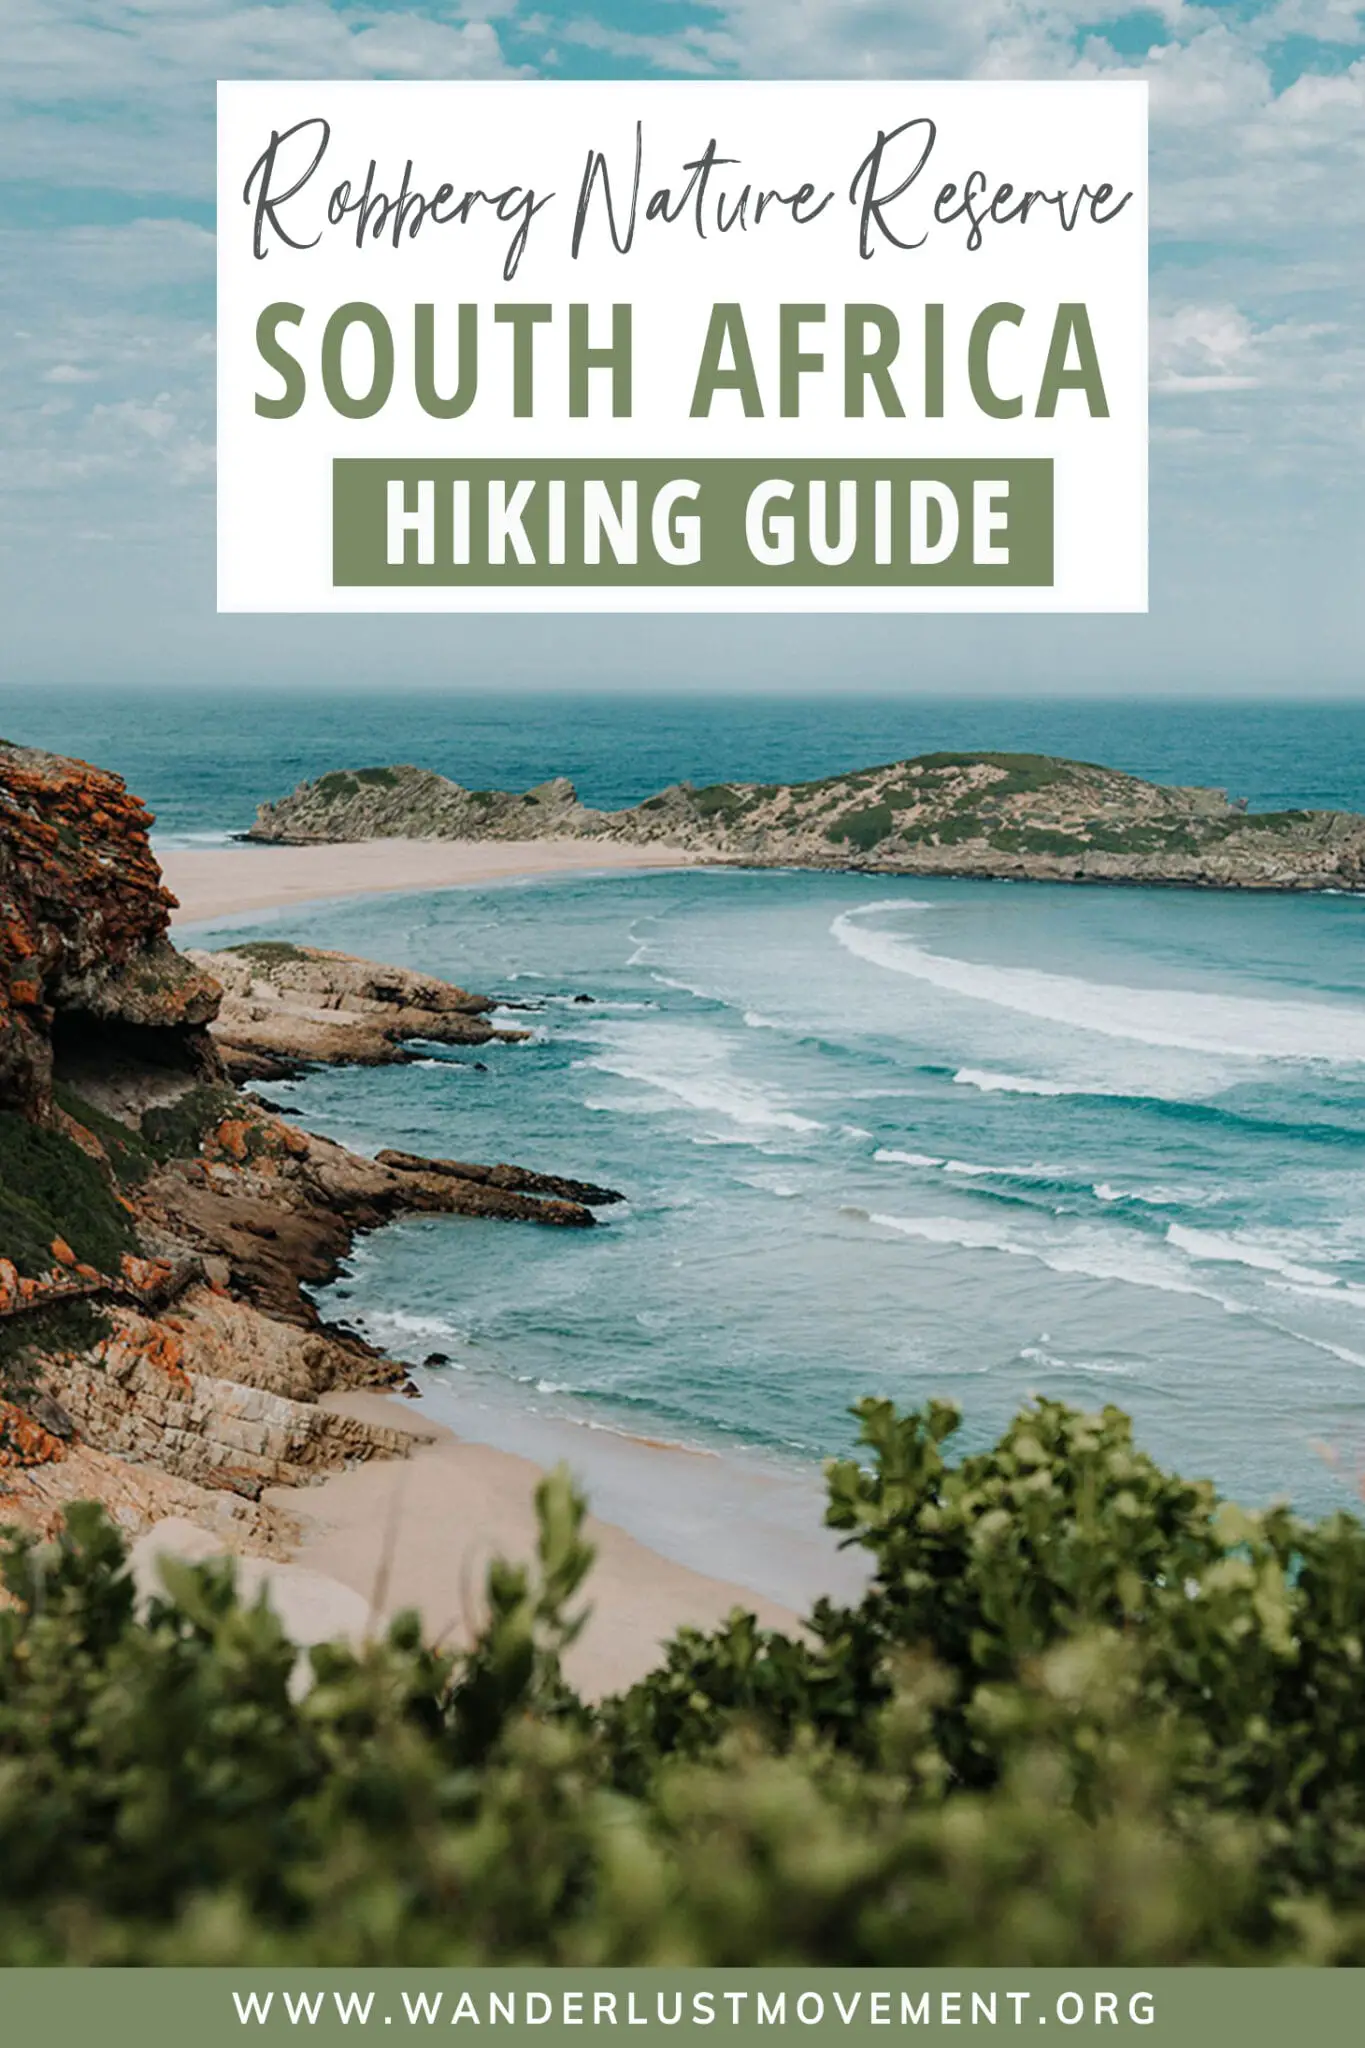 Hiking Robberg Nature Reserve: Everything You Need to Know